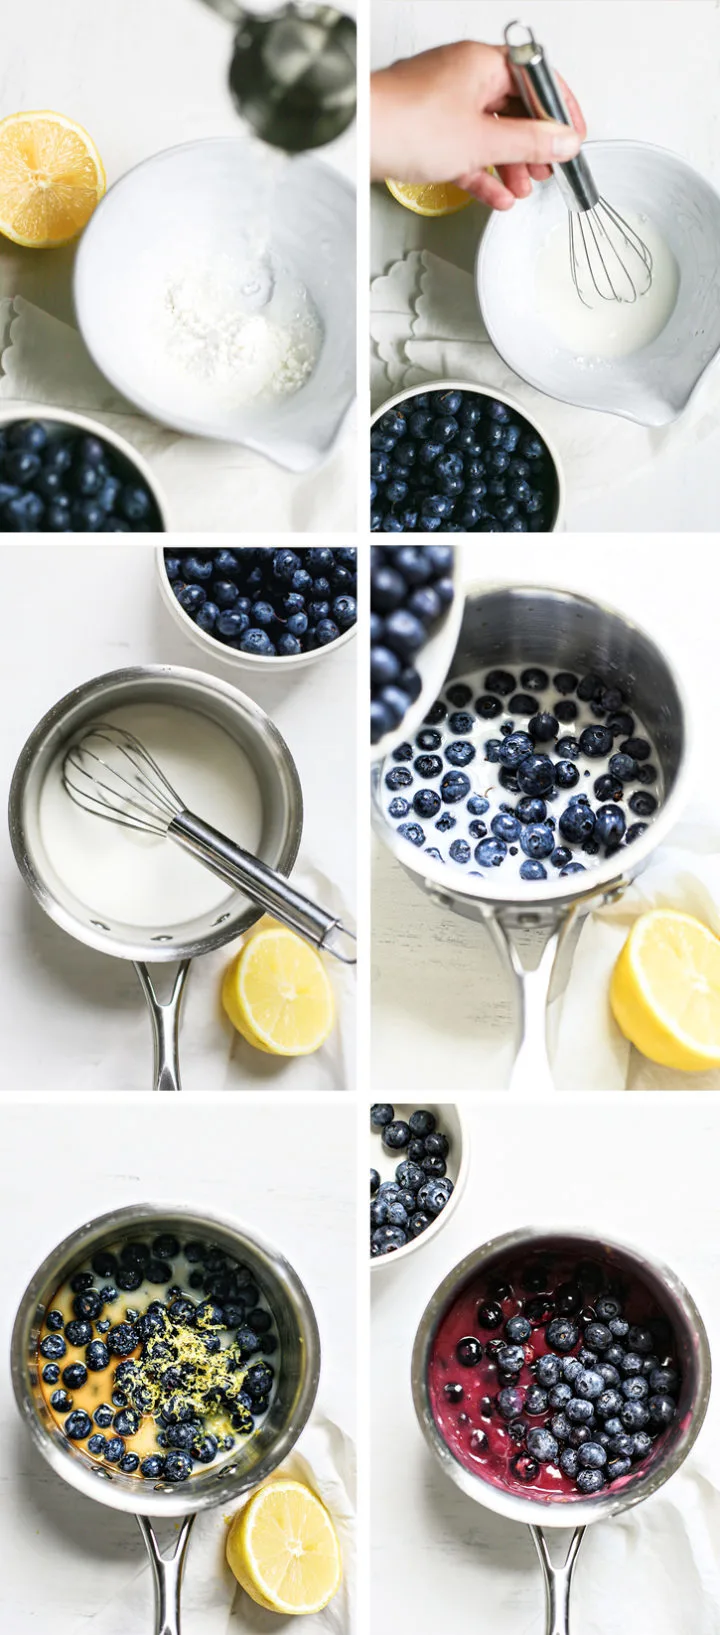 step by step photos showing how to make blueberry sauce